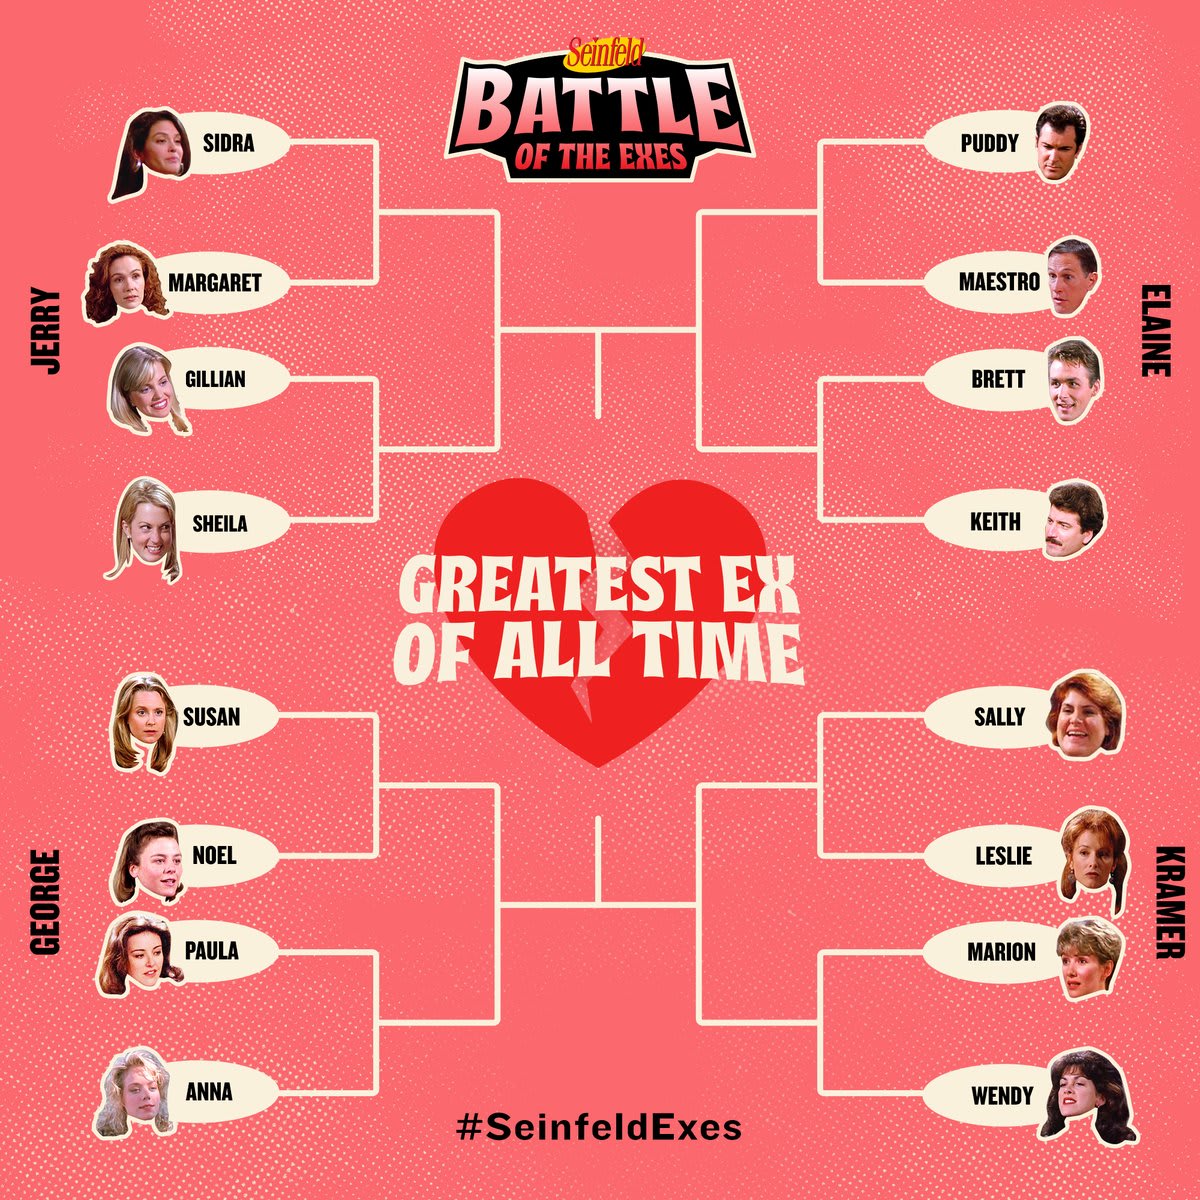 Who will be the Greatest Ex of All Time? You decide. Round of 16 voting starts tomorrow. Make your predictions now! SeinfeldExes GEAT Stream the complete series on